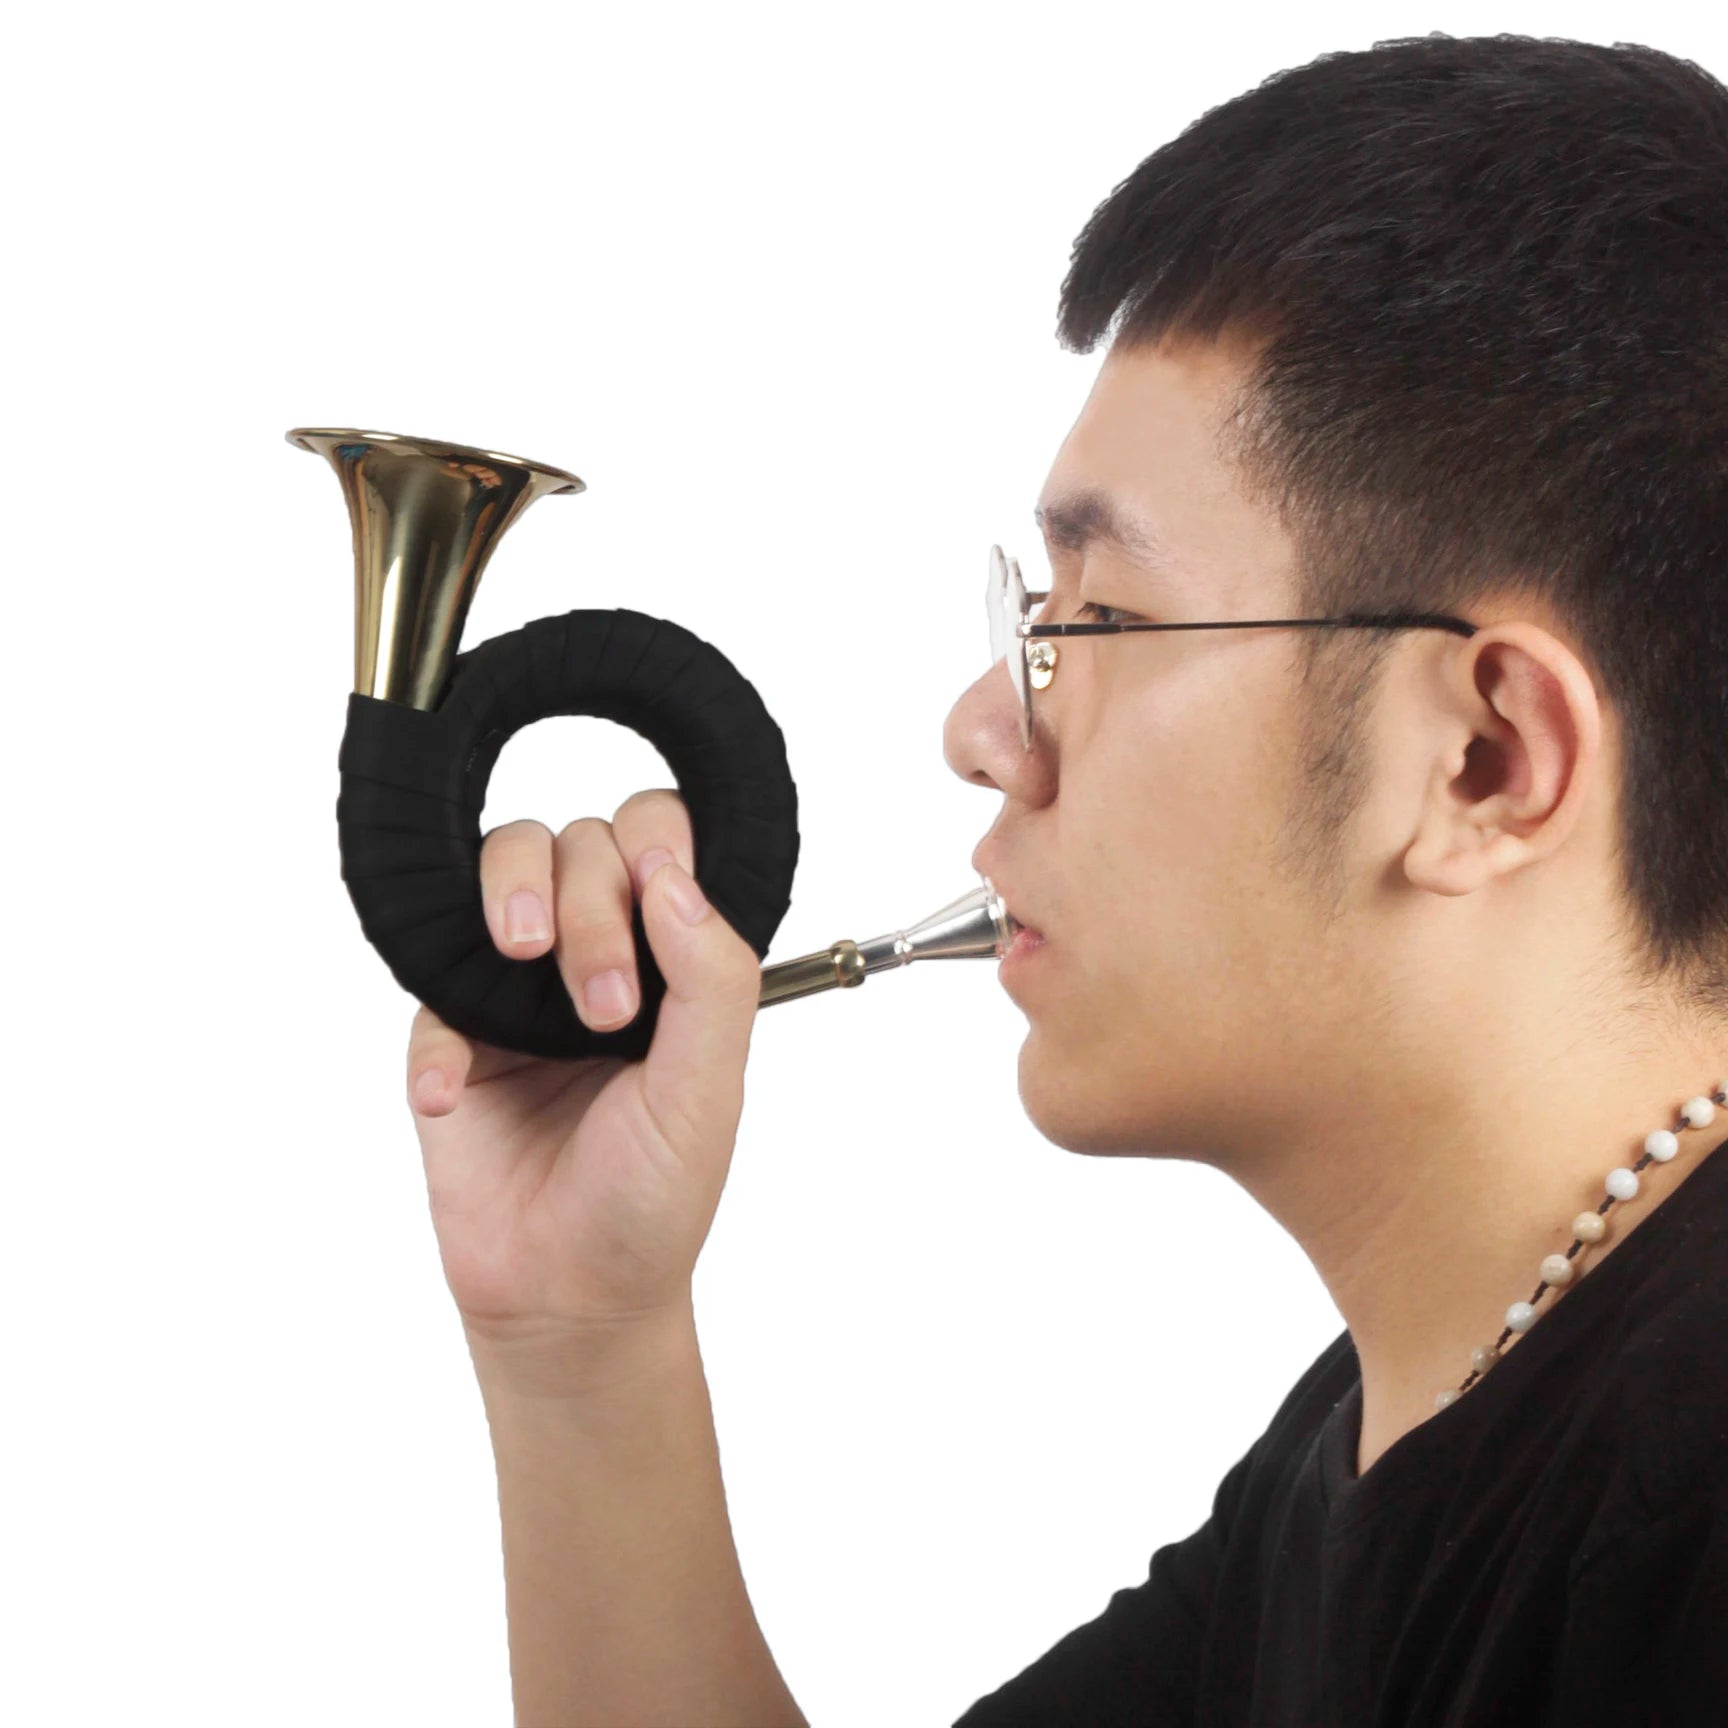 "SLADE Bb brass hunting horn" "Professional hunting horn" "Gold-plated wind instrument"!"